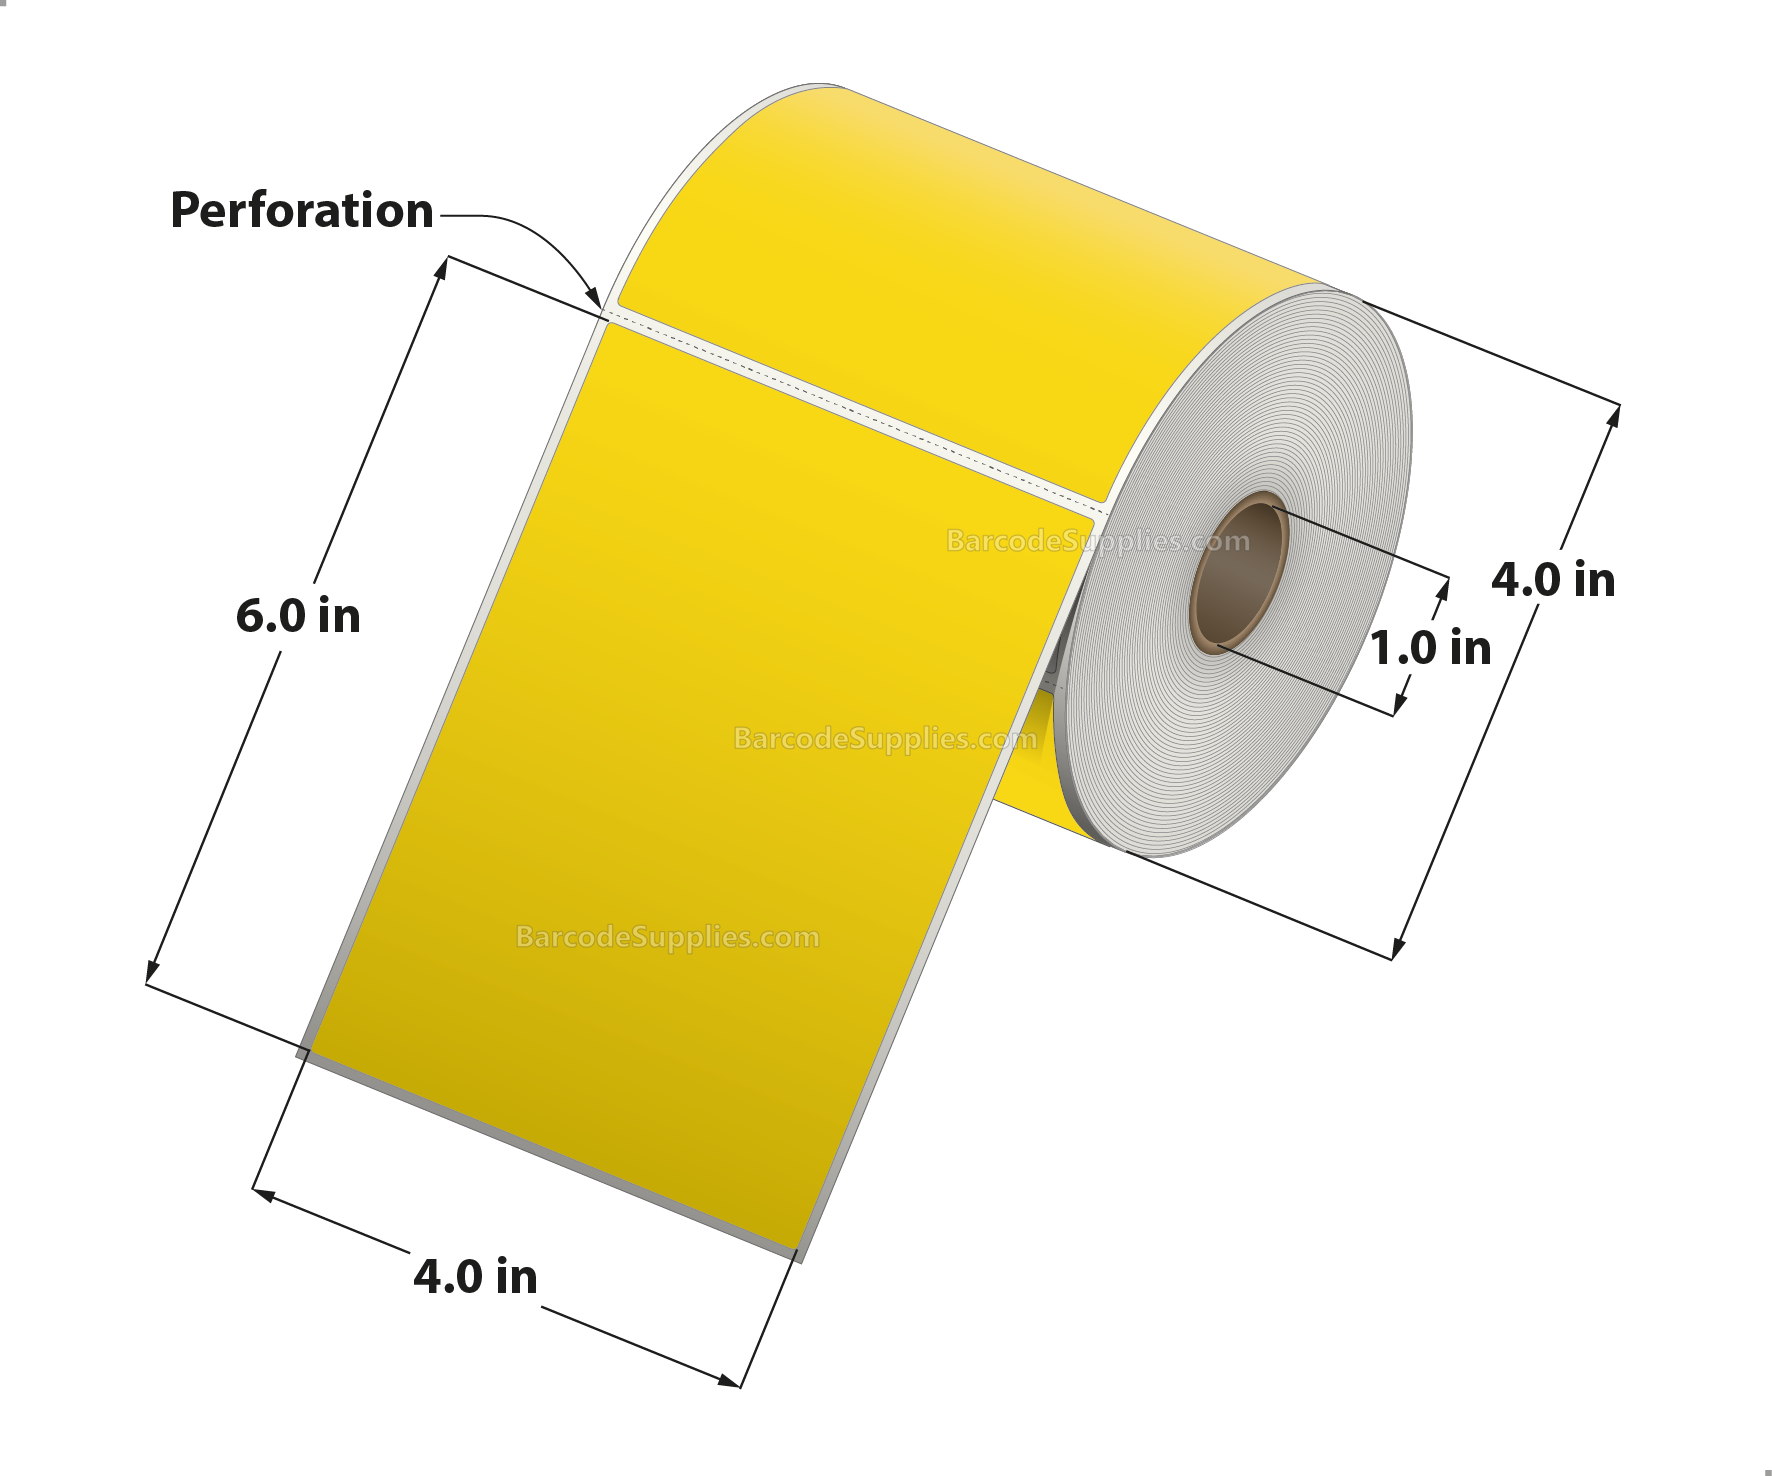 4 x 6 Thermal Transfer Pantone Yellow Labels With Permanent Adhesive - Perforated - 250 Labels Per Roll - Carton Of 12 Rolls - 3000 Labels Total - MPN: RFC-4-6-250-YL